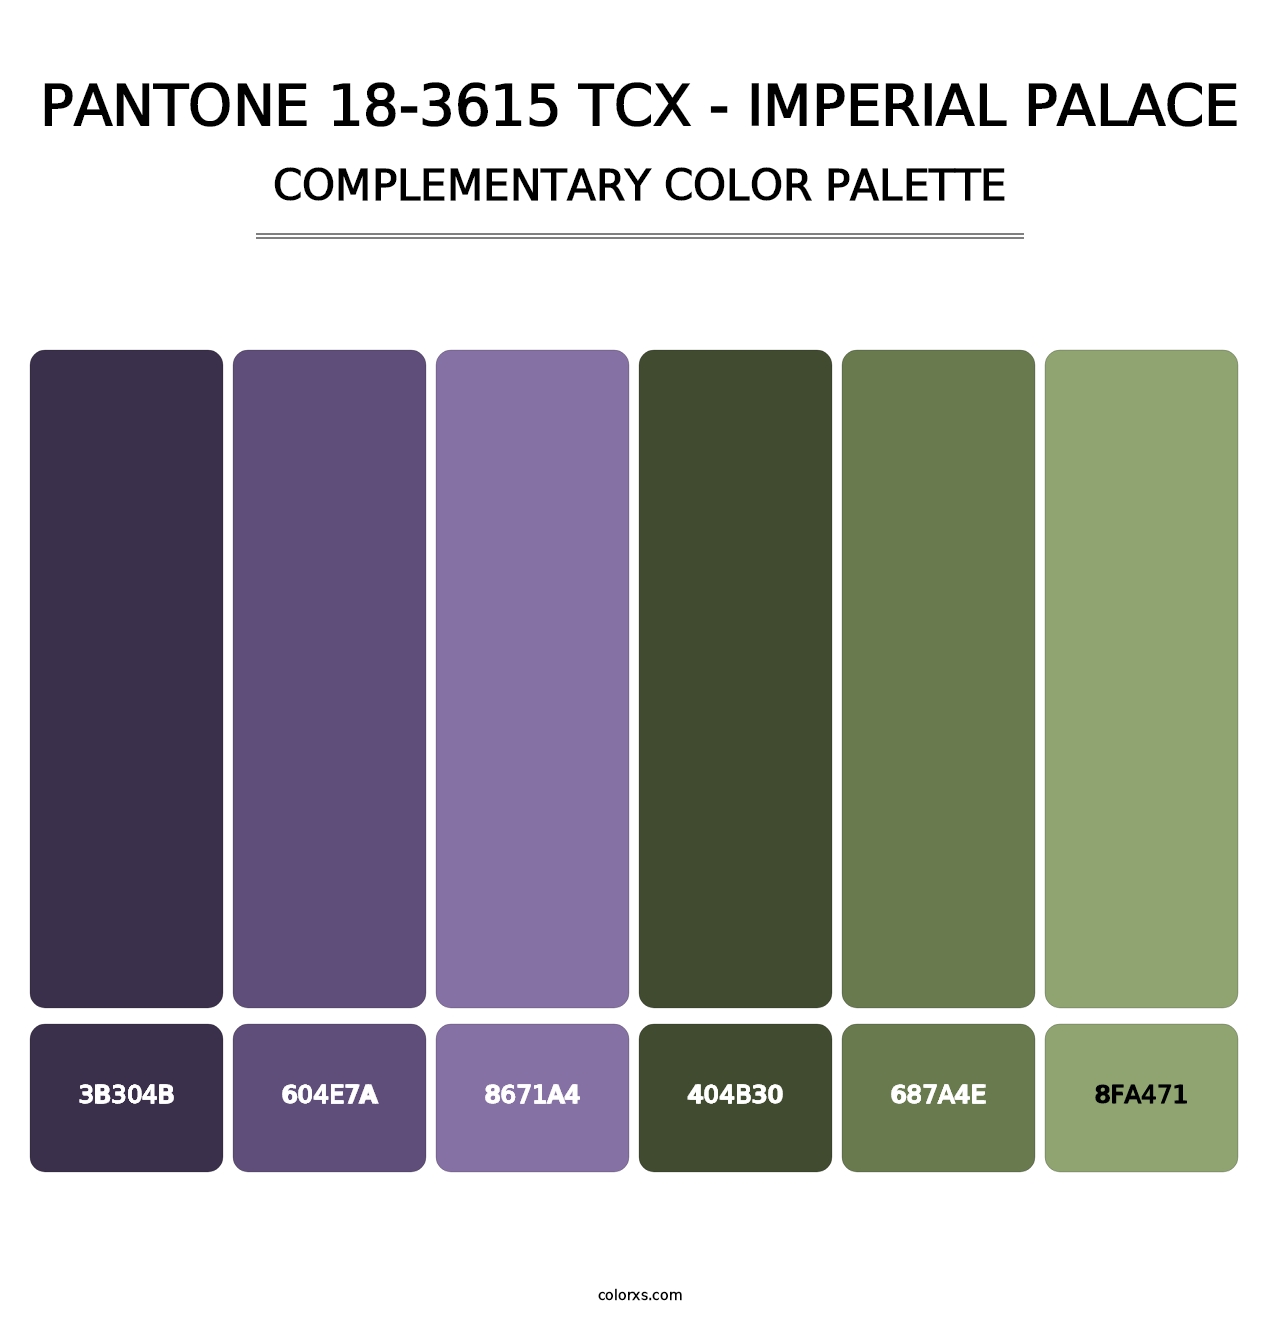 PANTONE 18-3615 TCX - Imperial Palace - Complementary Color Palette